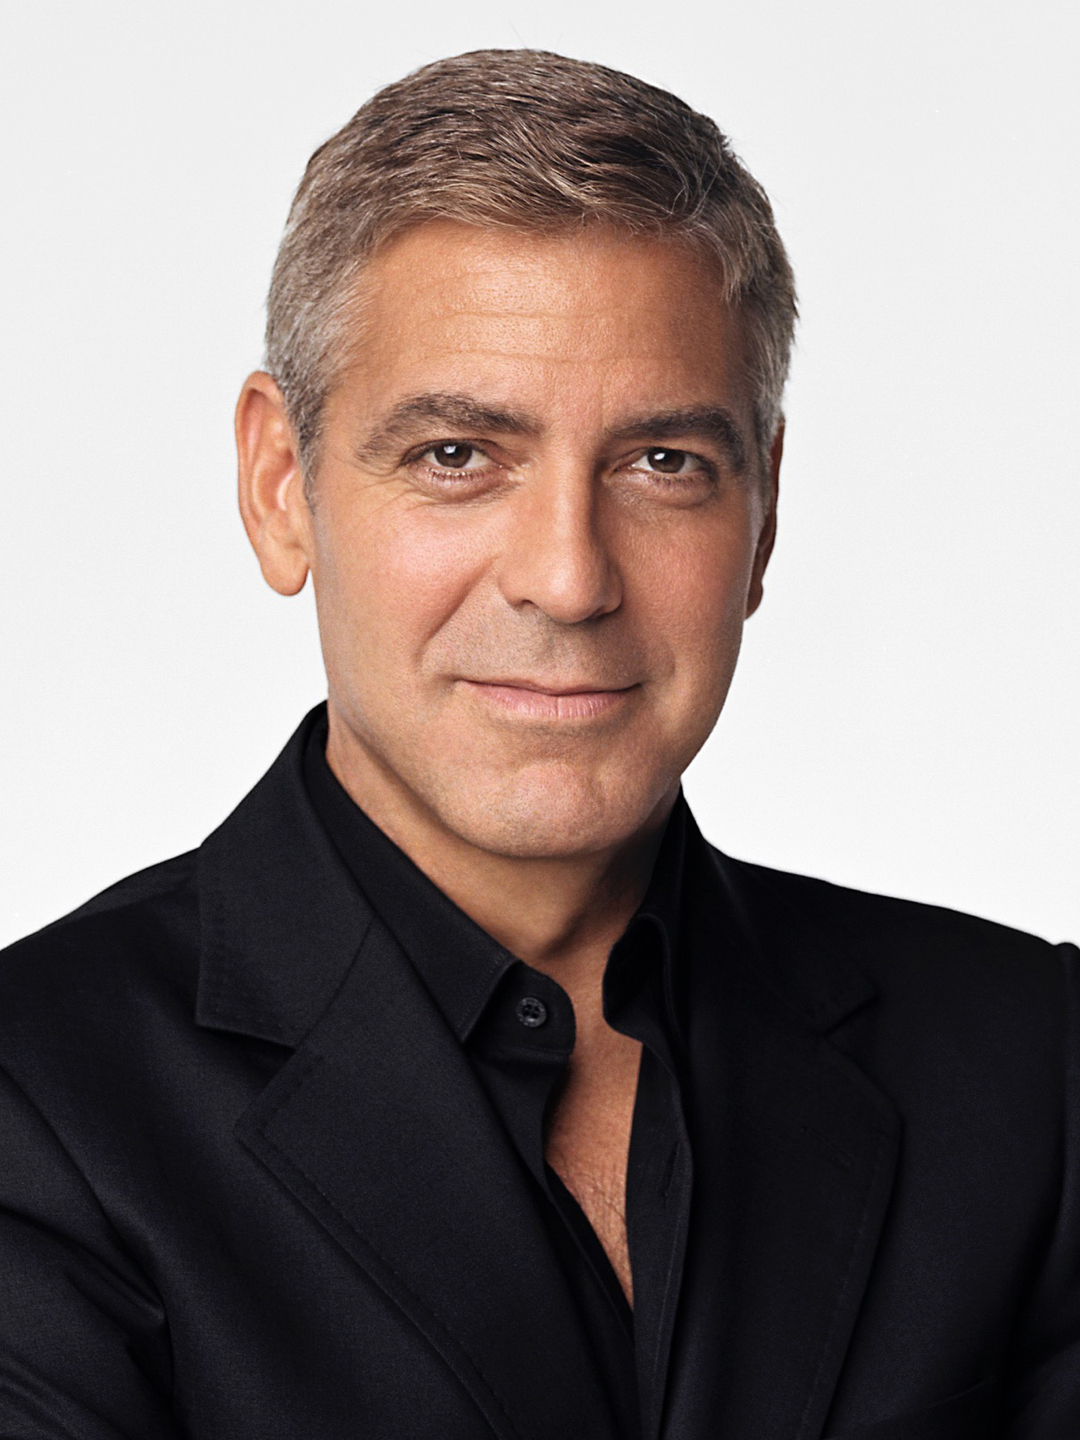 George Clooney life story